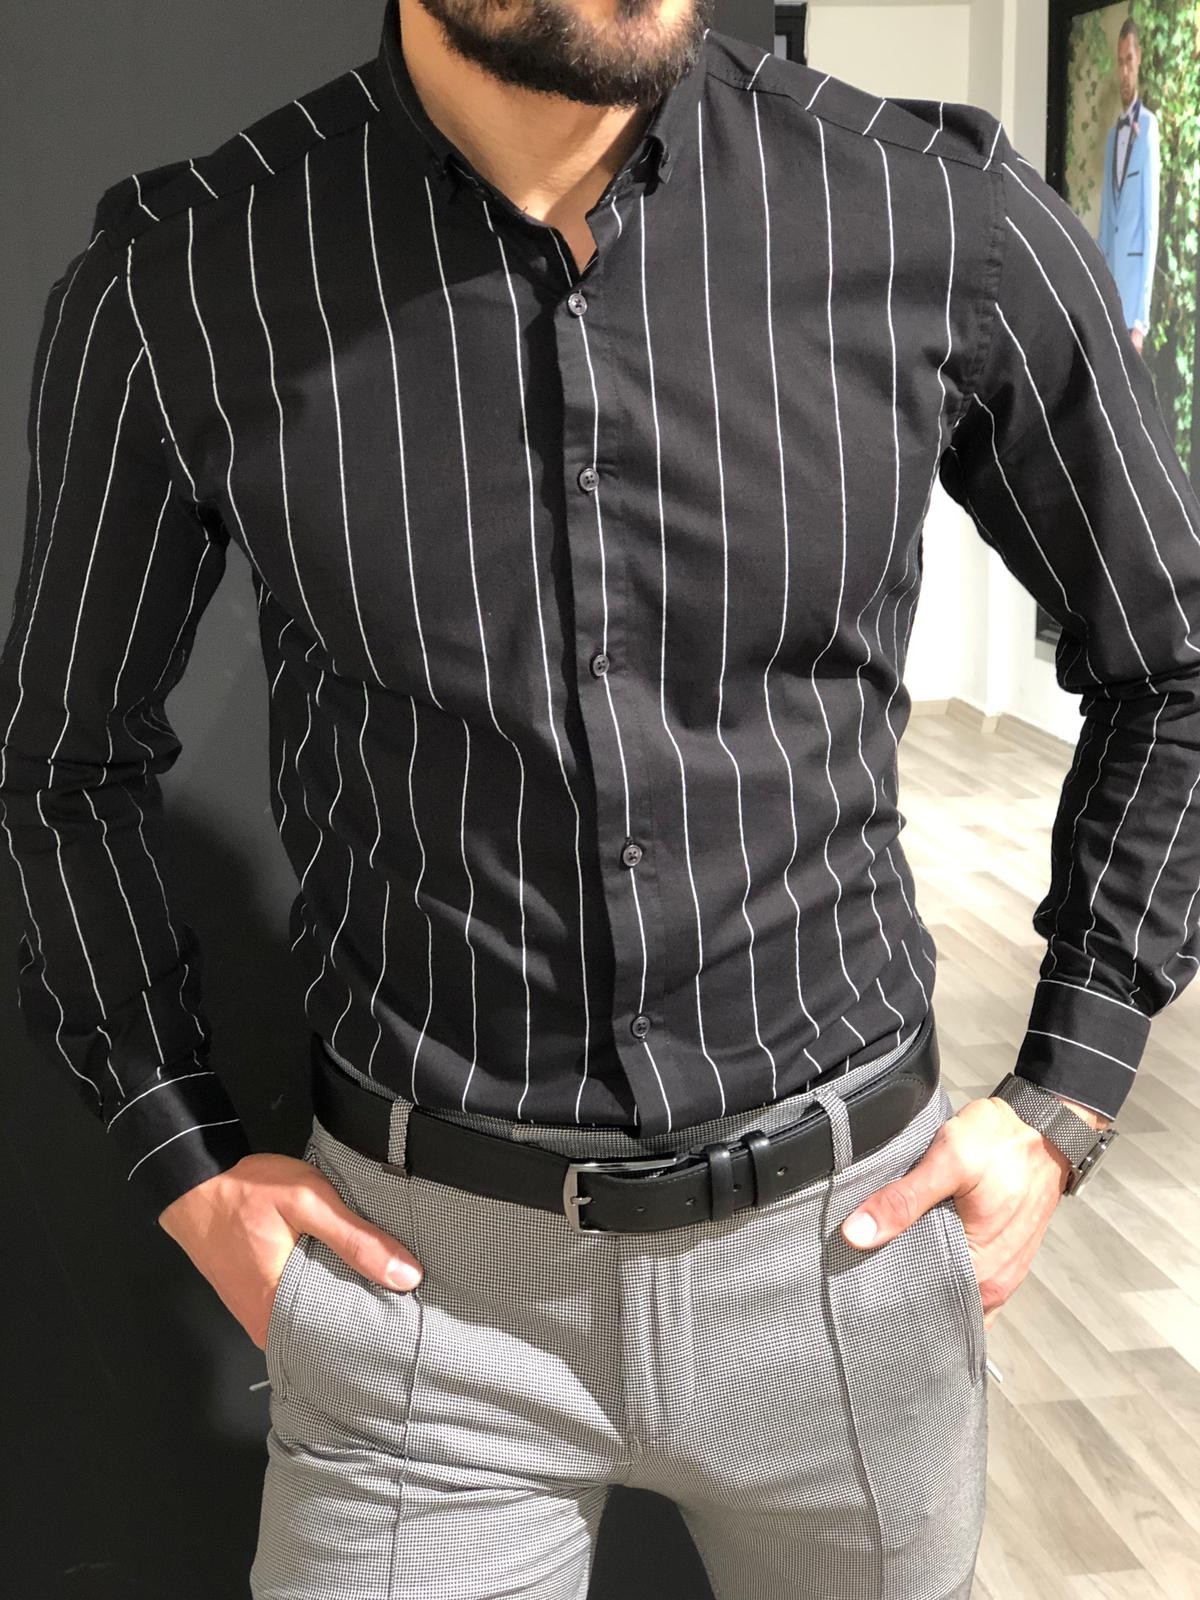 Buy Black Slim Fit Striped Shirt by Gentwith.com with Free Shipping